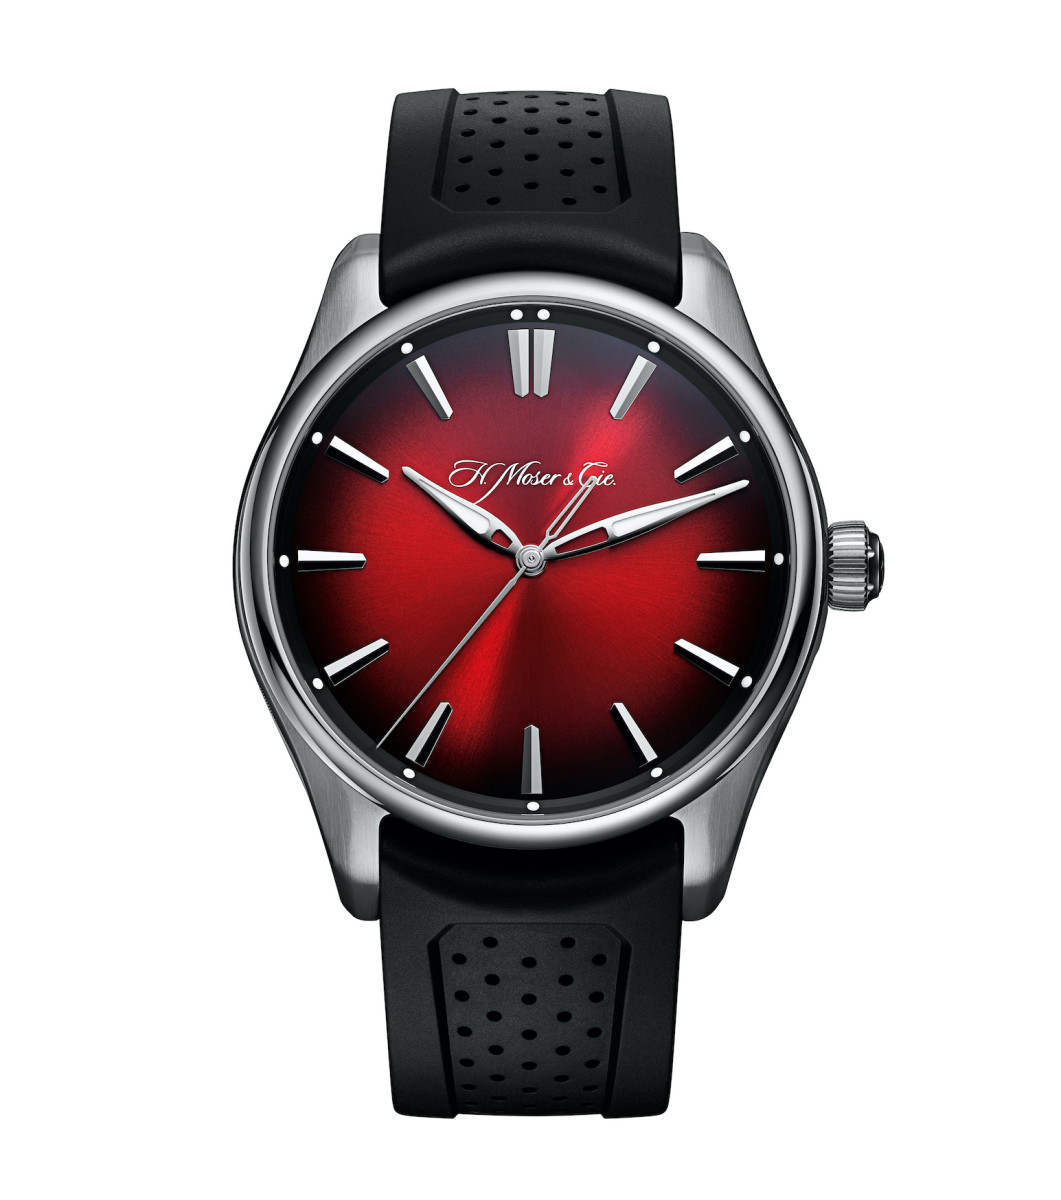 H. Moser & Cie Pioneer Center Seconds Red